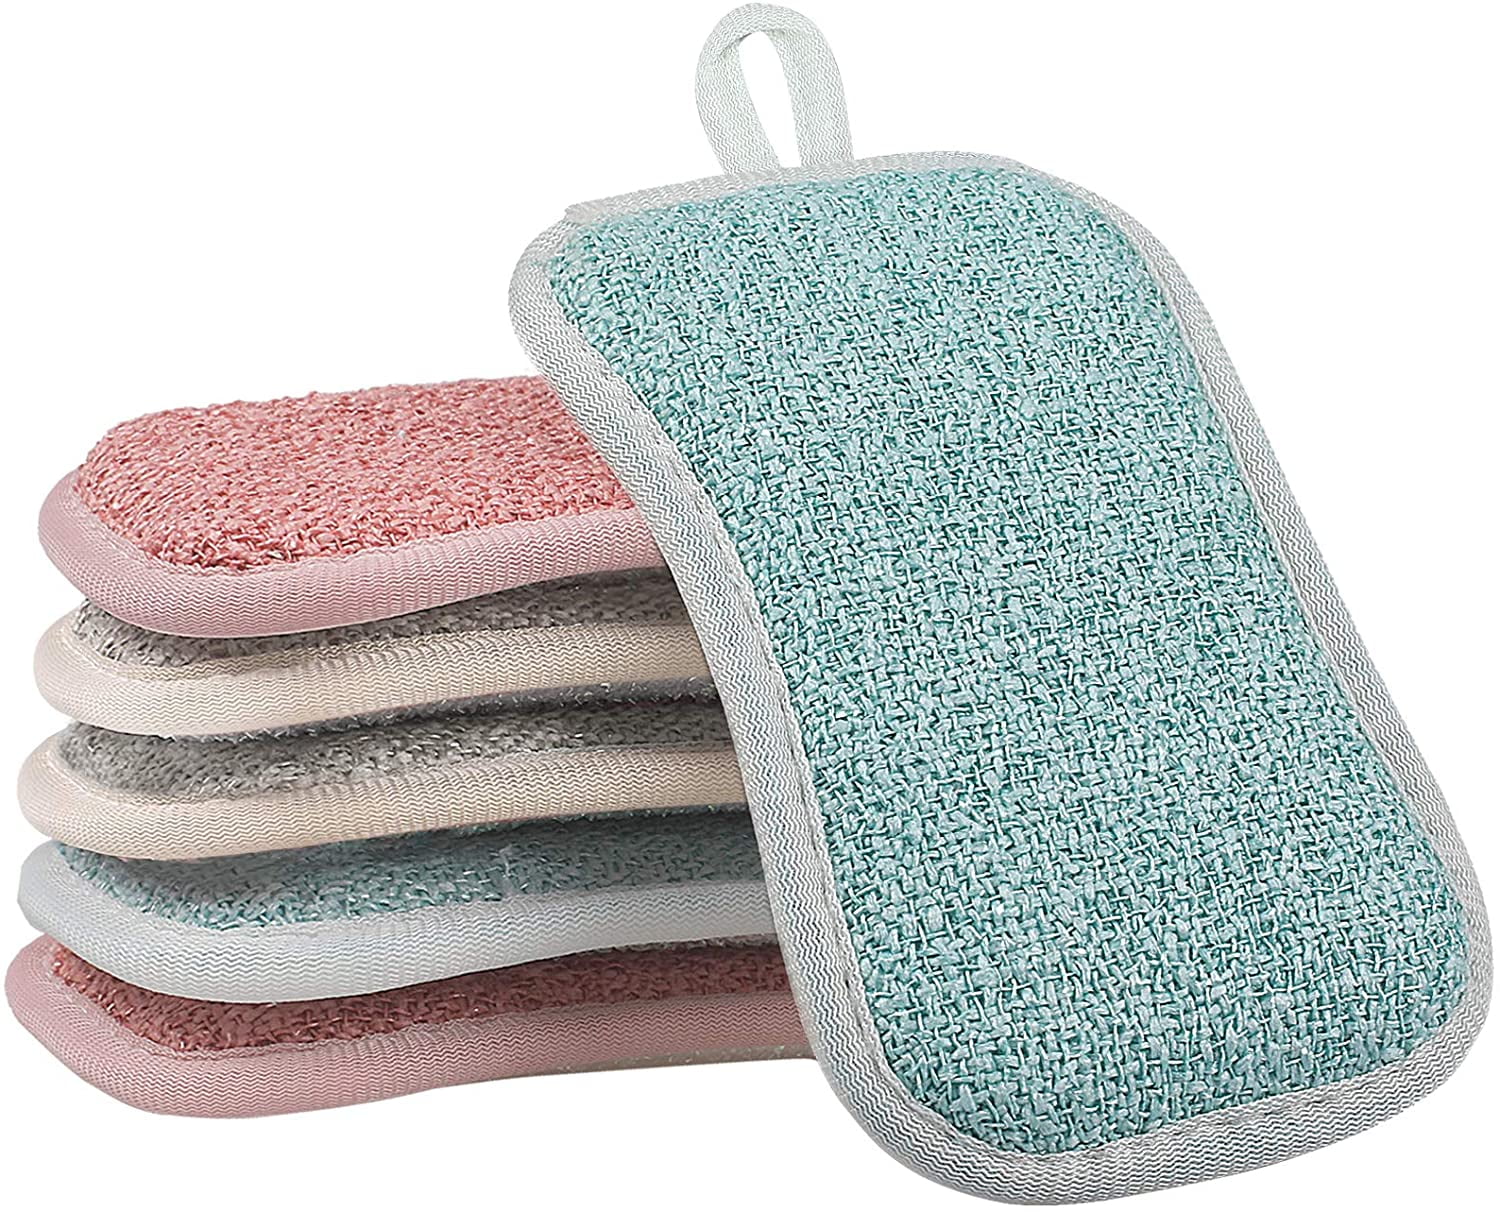 Kitcheniva Cleaning Sponges - 6 Pack, Pack of 6 - Fry's Food Stores